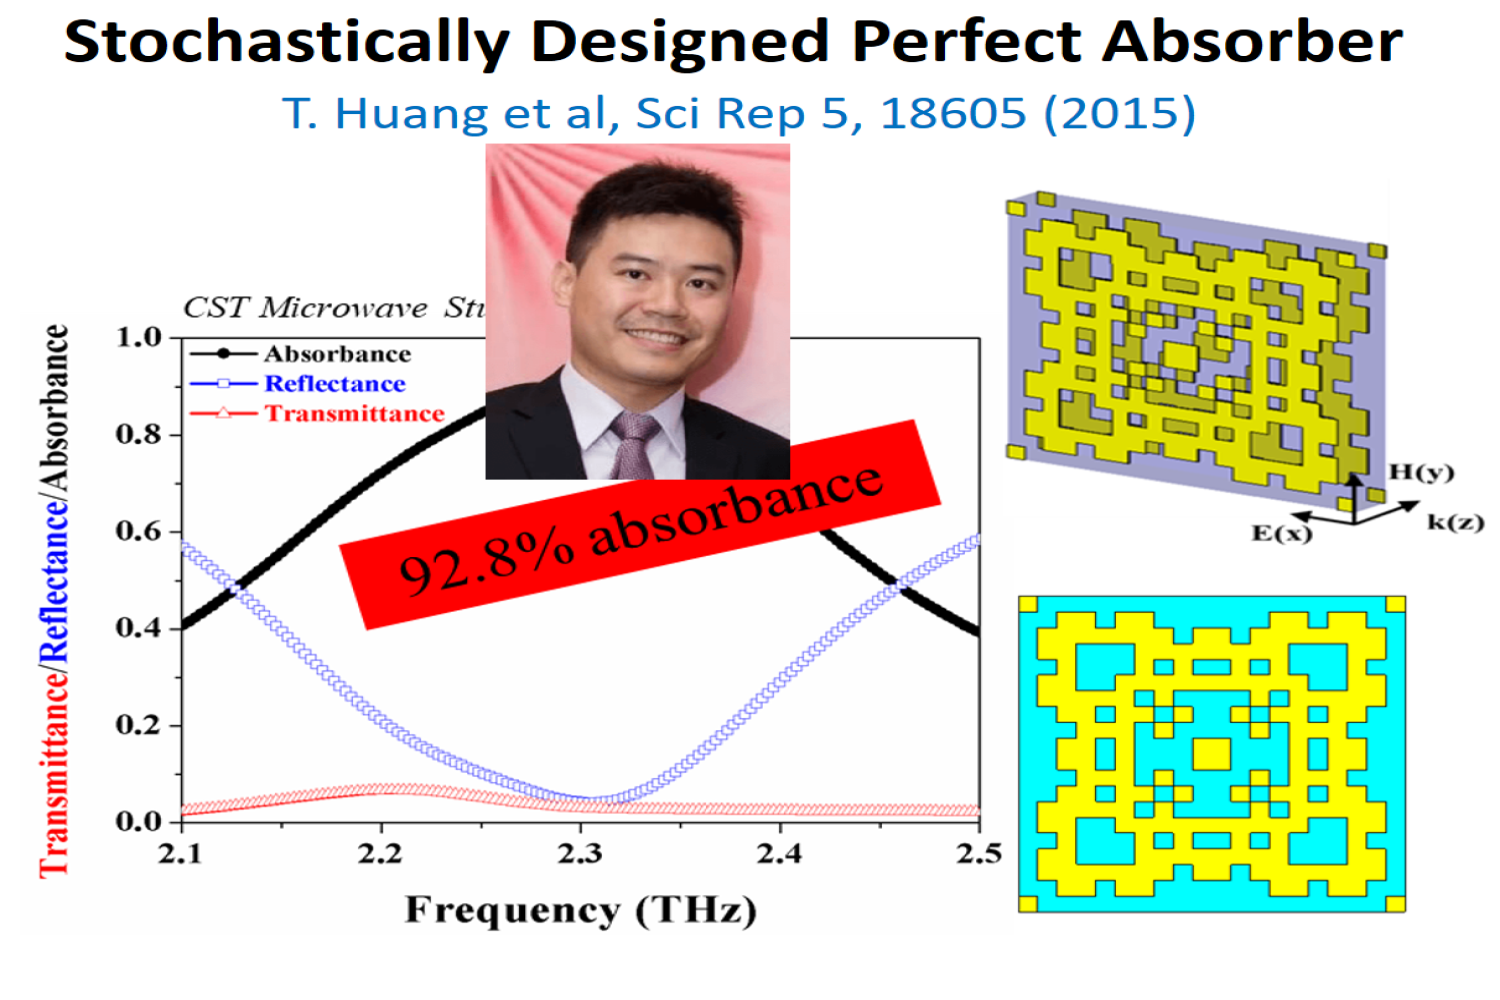 Stochastically Designed Perfect Absorber